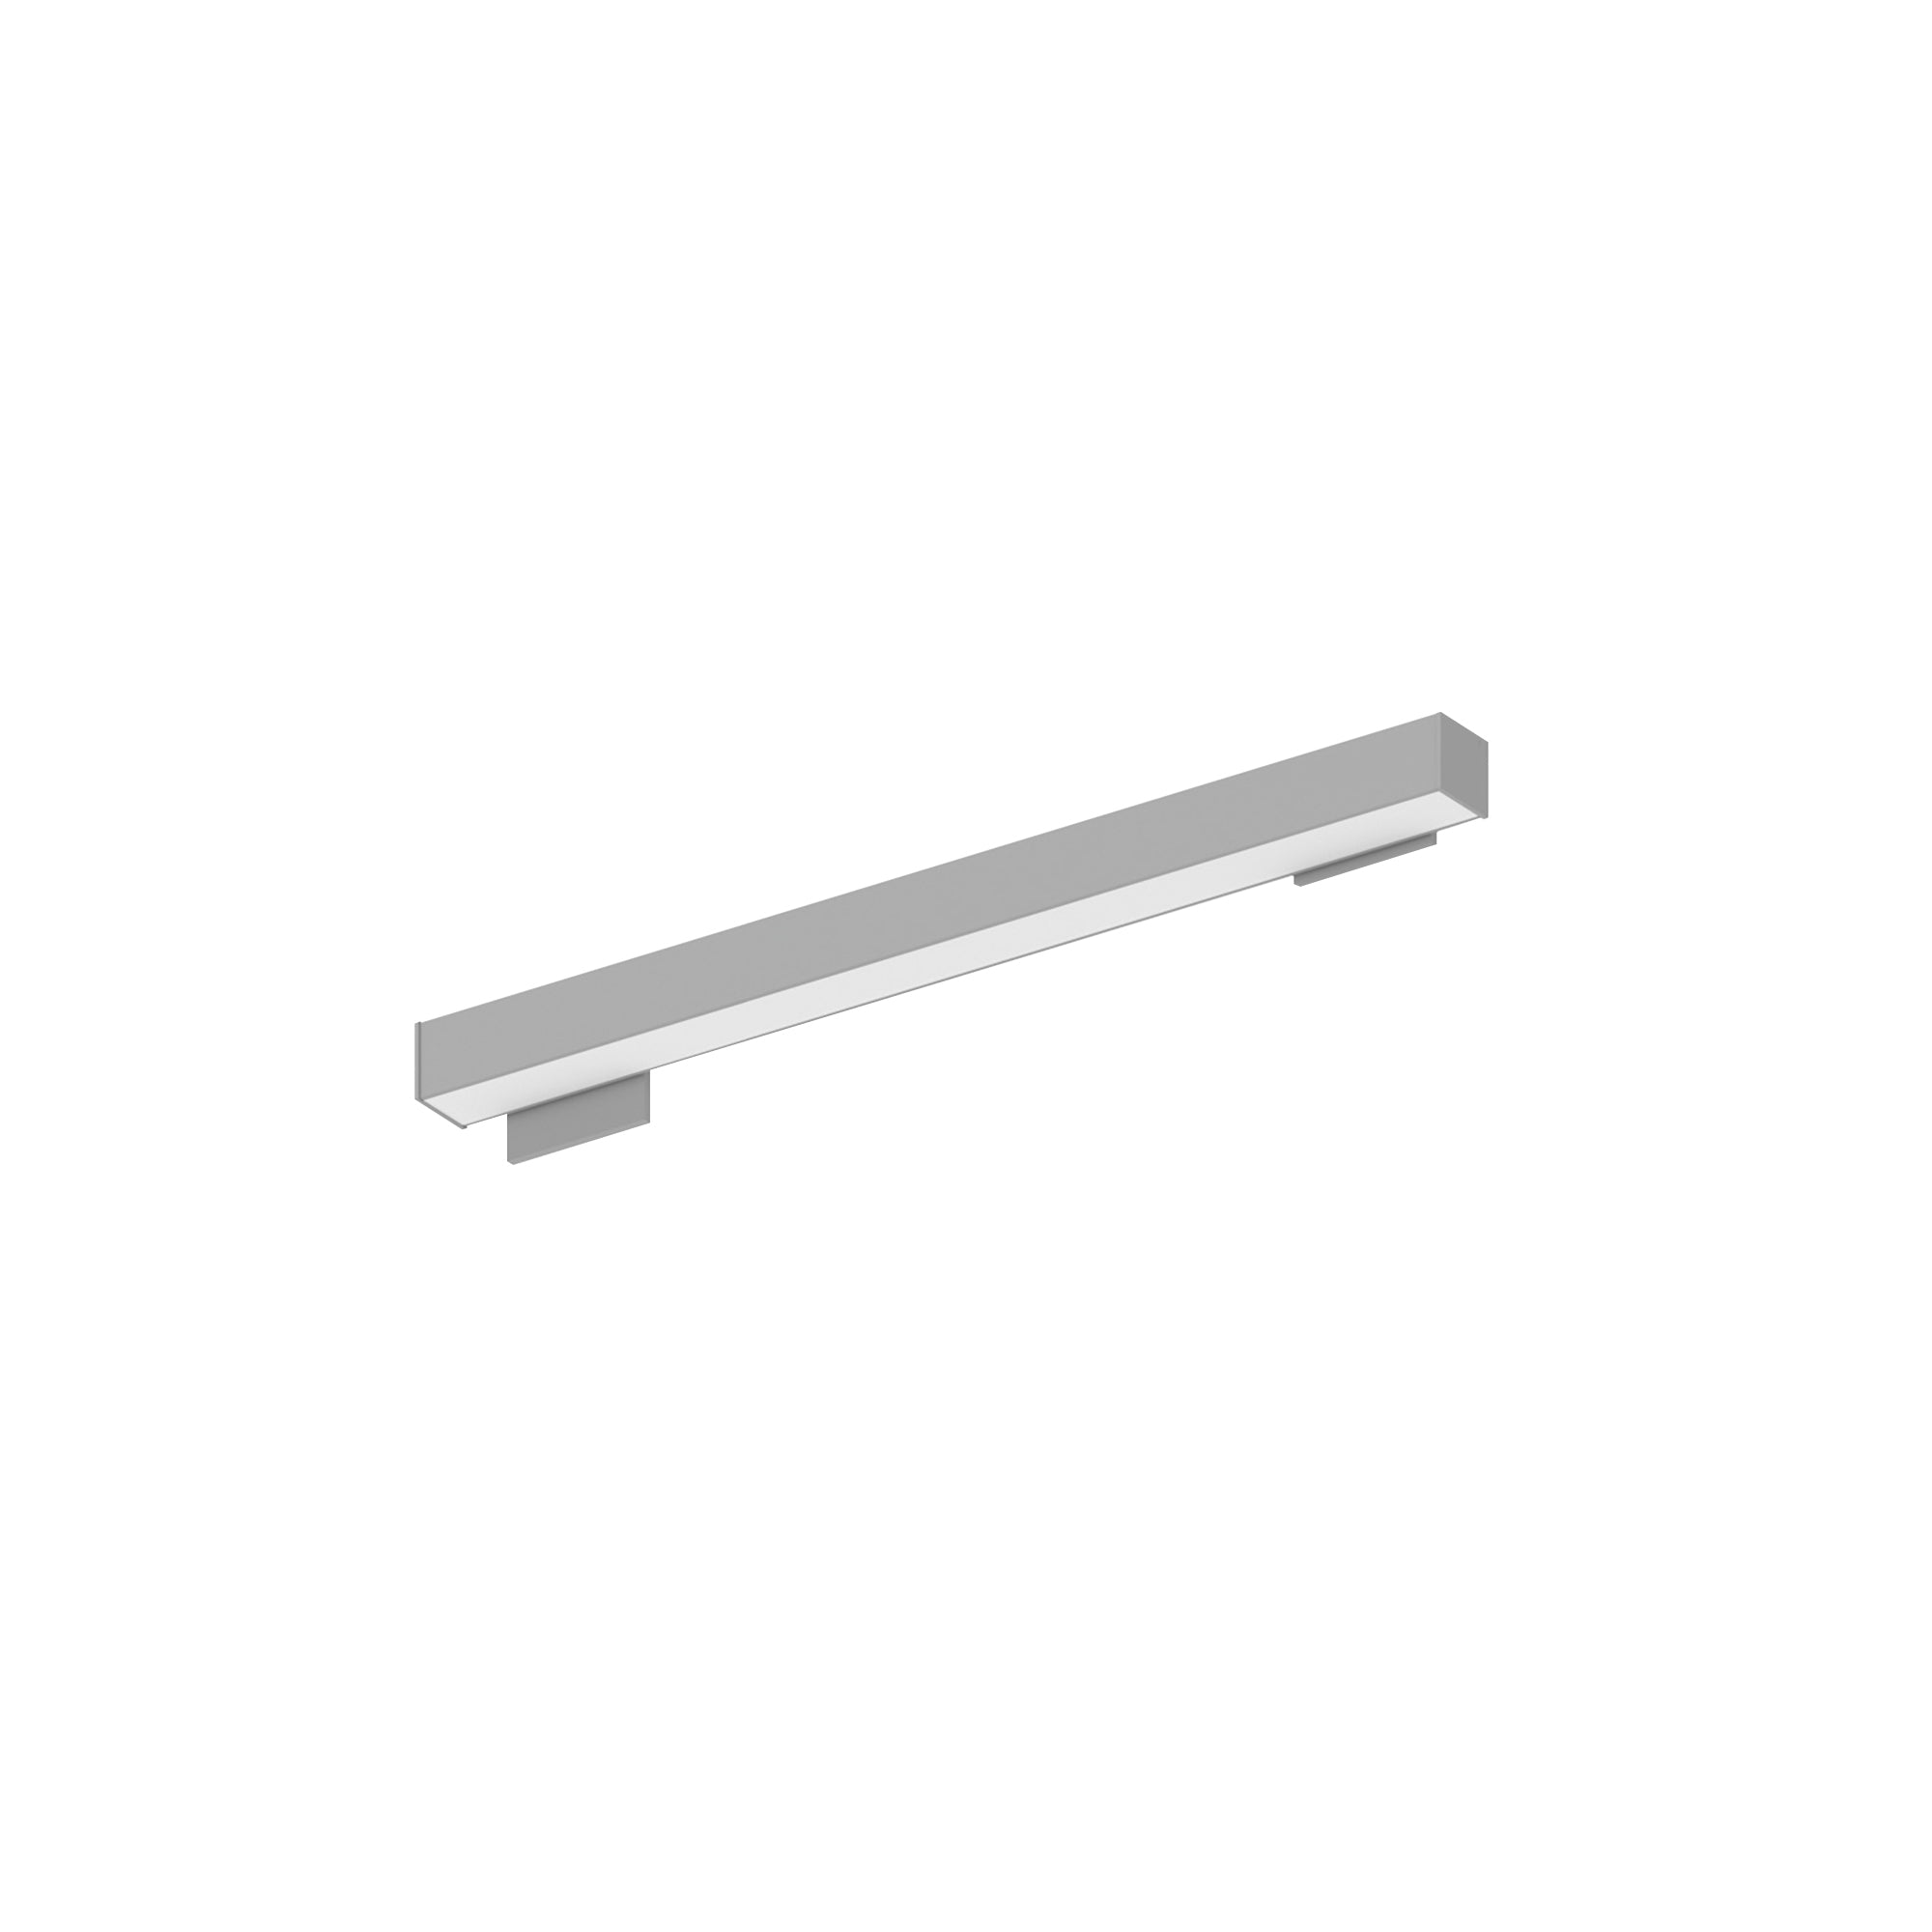 Nora Lighting NWLIN-21040A/L4P-R2 - Linear - 2' L-Line LED Wall Mount Linear, 2100lm / 4000K, 4 Inchx4 Inch Left Plate & 2 Inchx4 Inch Right Plate, Left Power Feed, Aluminum Finish